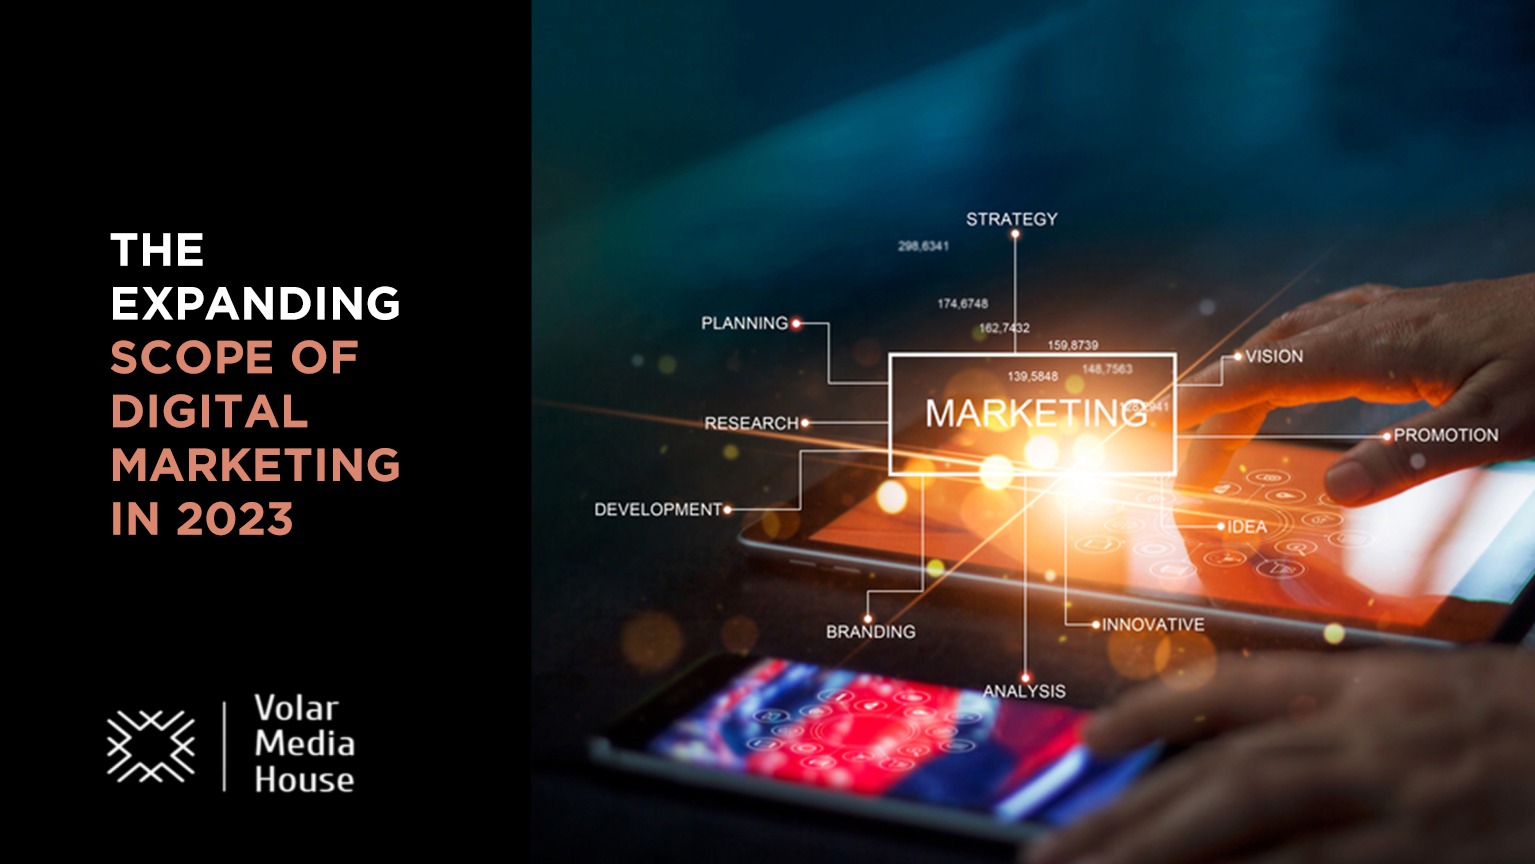 The Expanding Scope of Digital Marketing in 2023